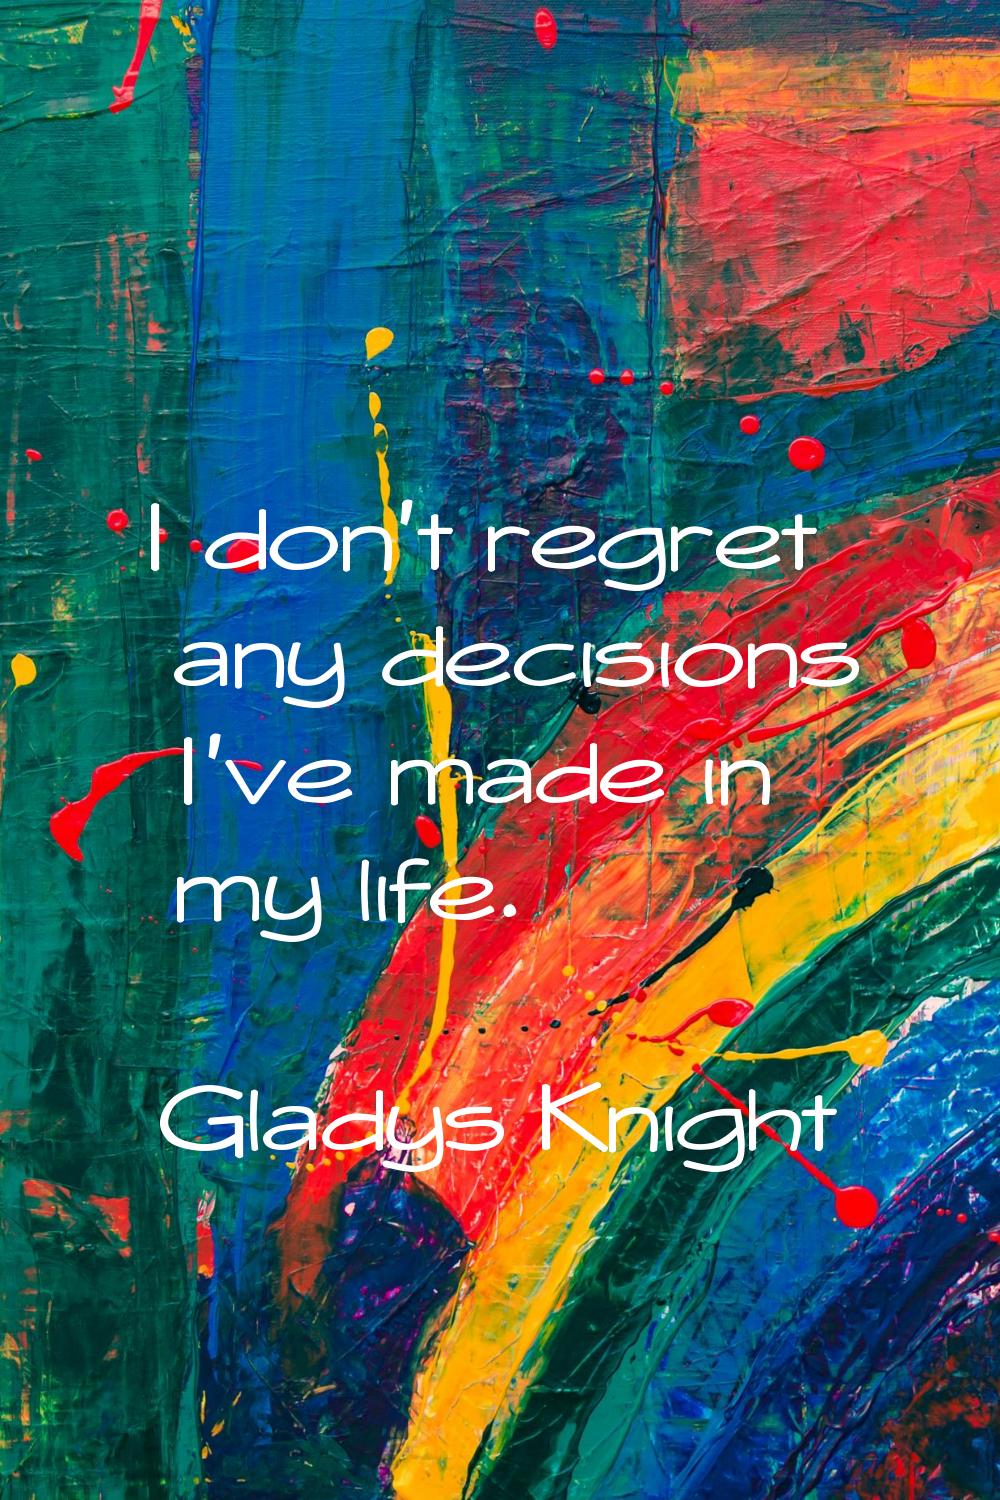 I don't regret any decisions I've made in my life.